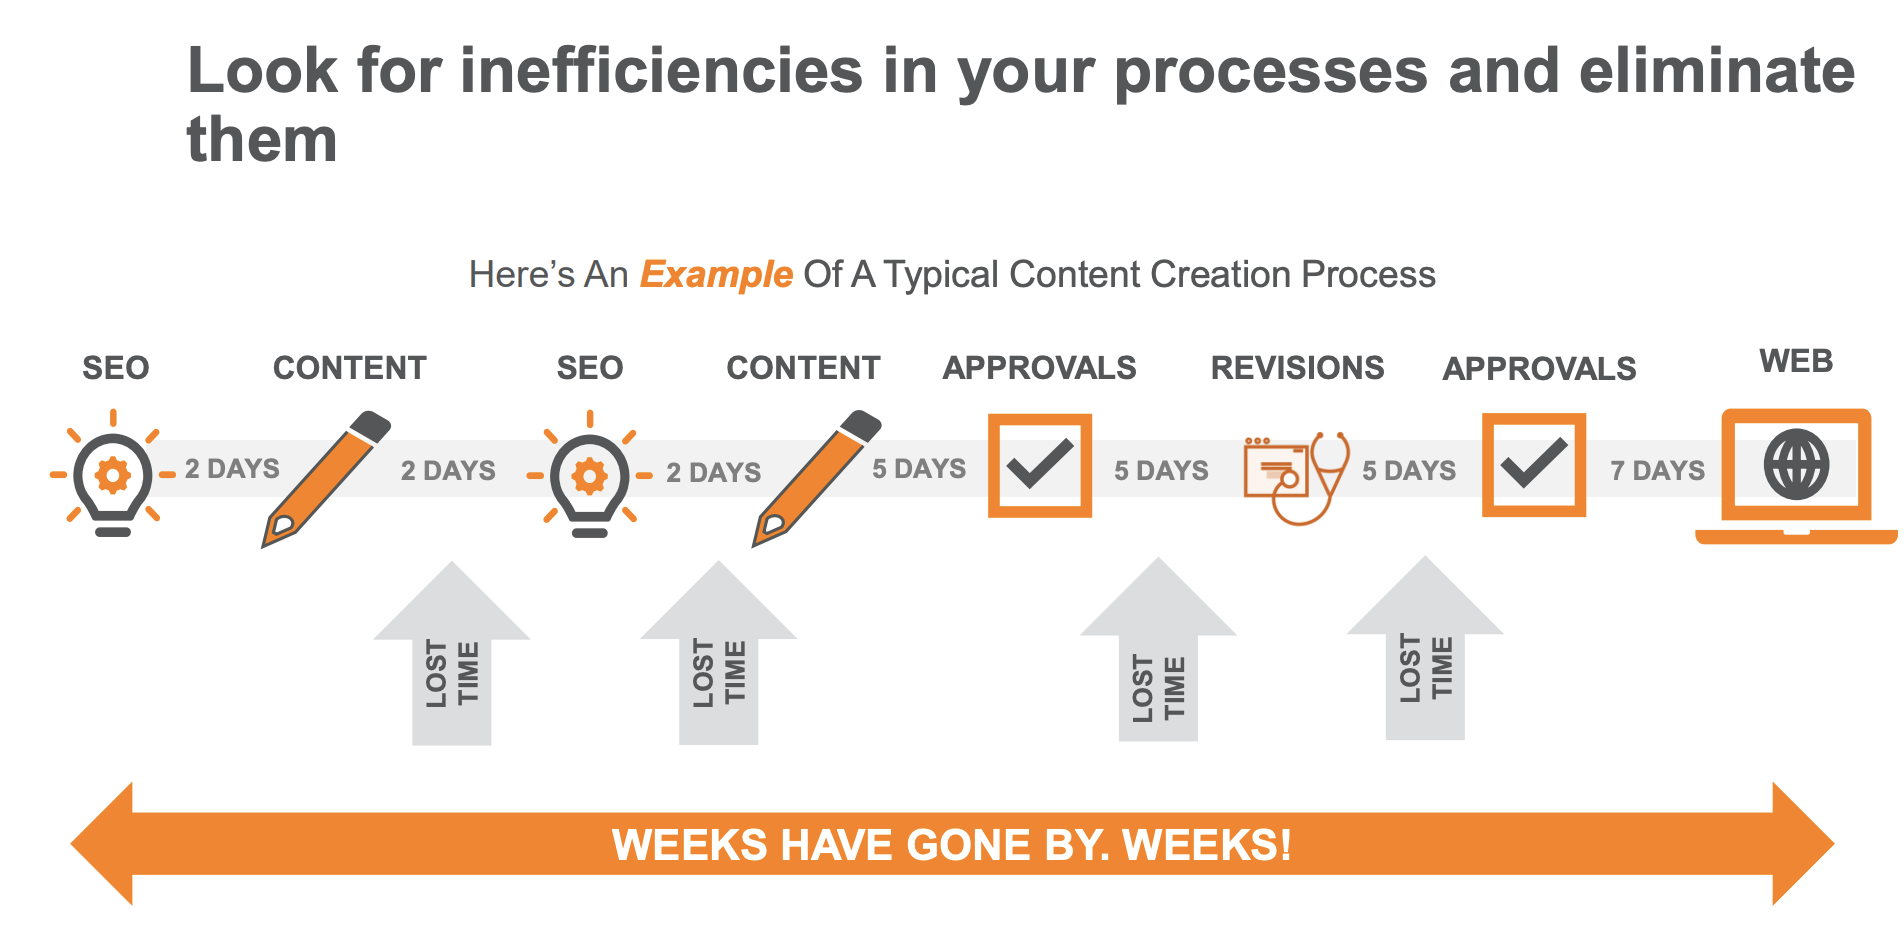 Level up your content strategy - 5 steps to SEO success